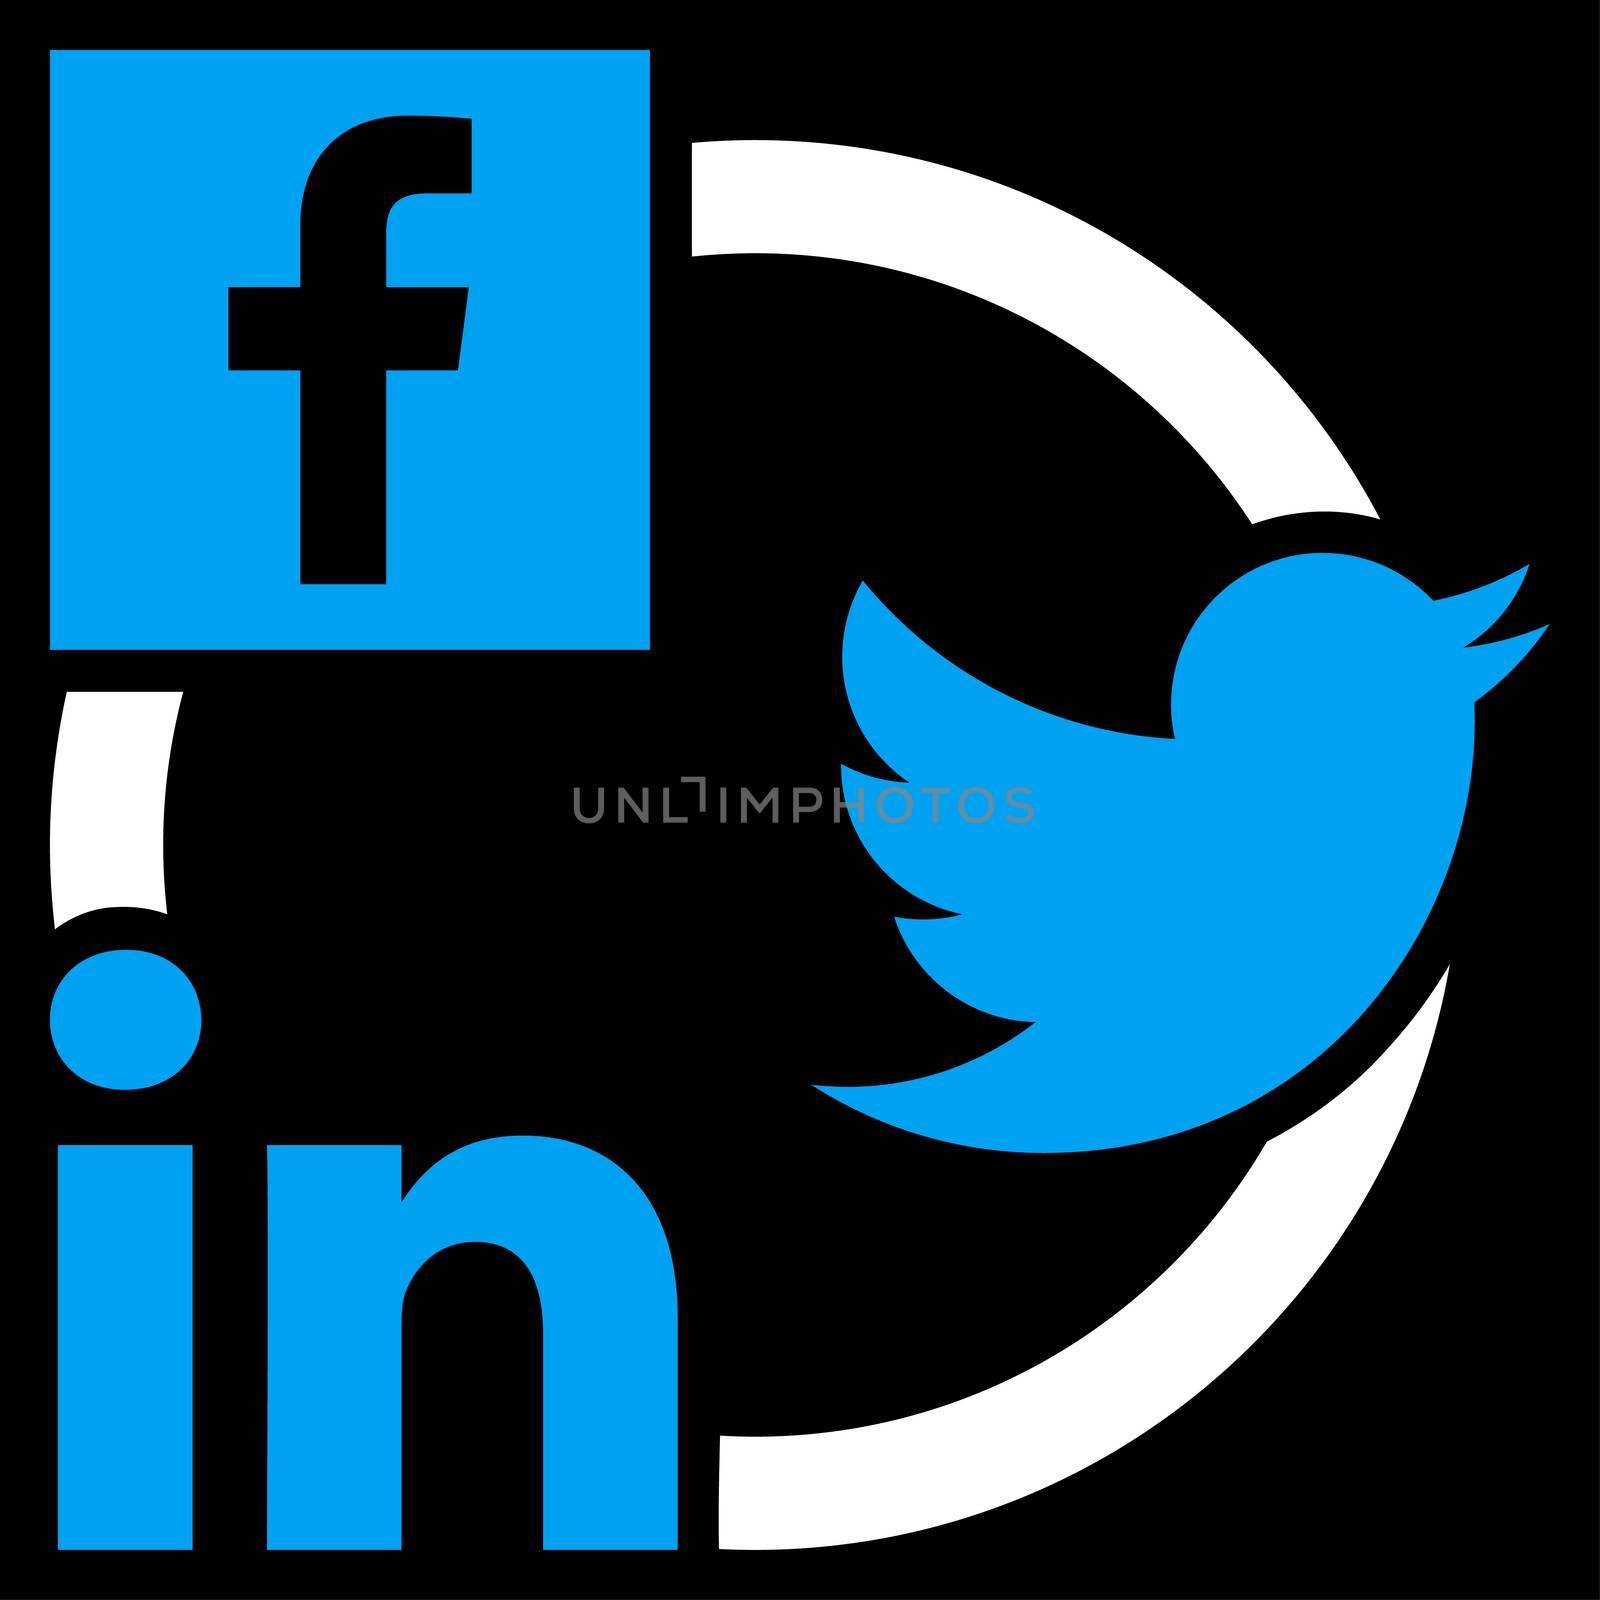 Social Networks Icon. This flat glyph symbol uses blue and white colors, and isolated on a black background.